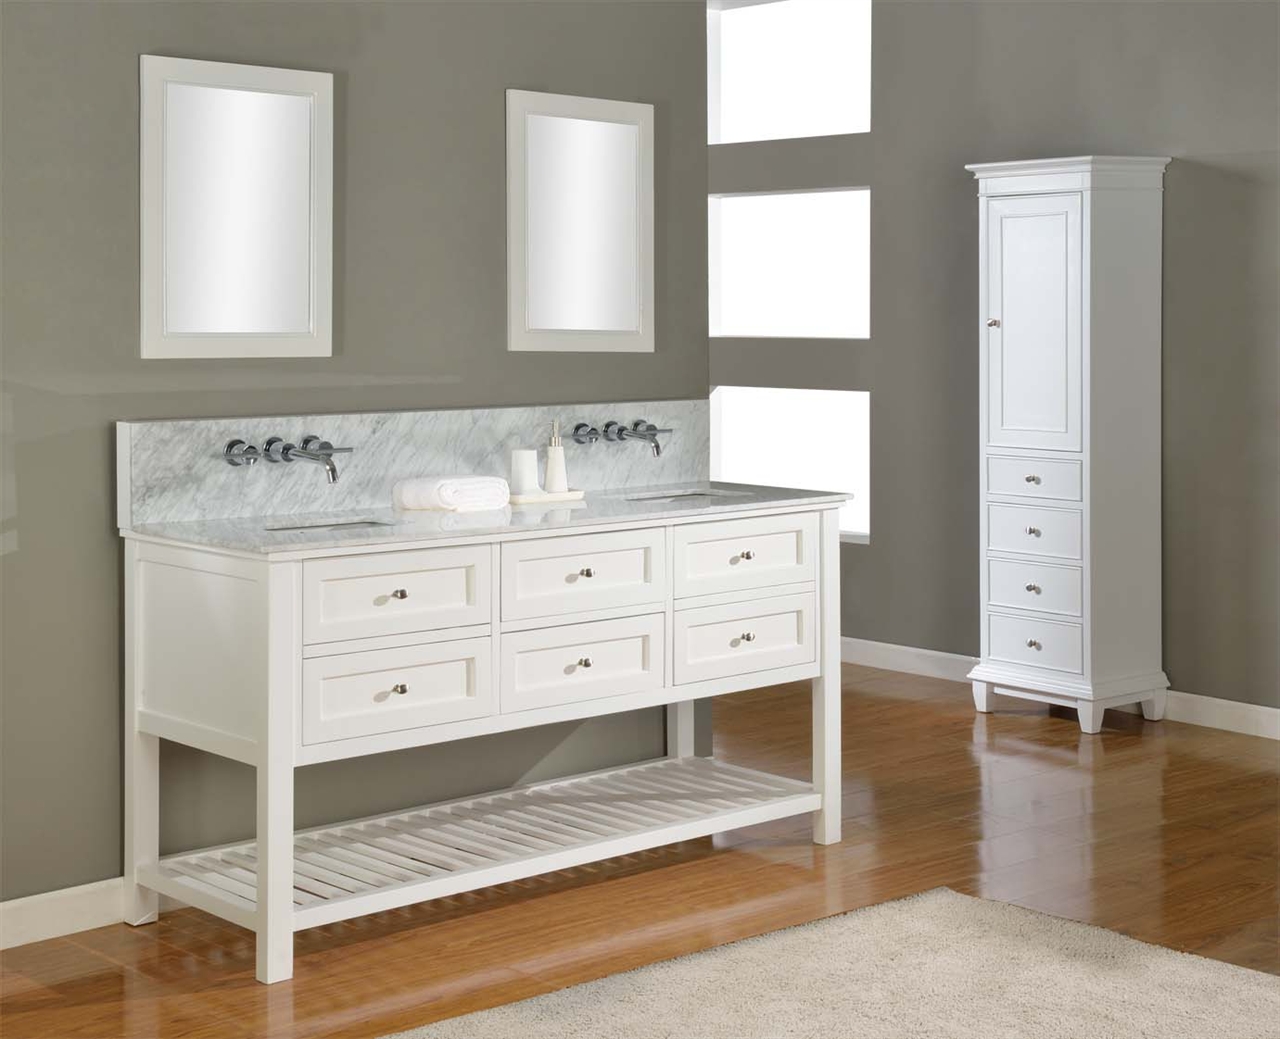 Bathroom Ideas Sink Sweet Bathroom Ideas With Double Sink Vanity Design With Saver Contiguous Tall Storage In Bright Color Bathroom Double Sink Vanity Application For Spacious Bathroom Design